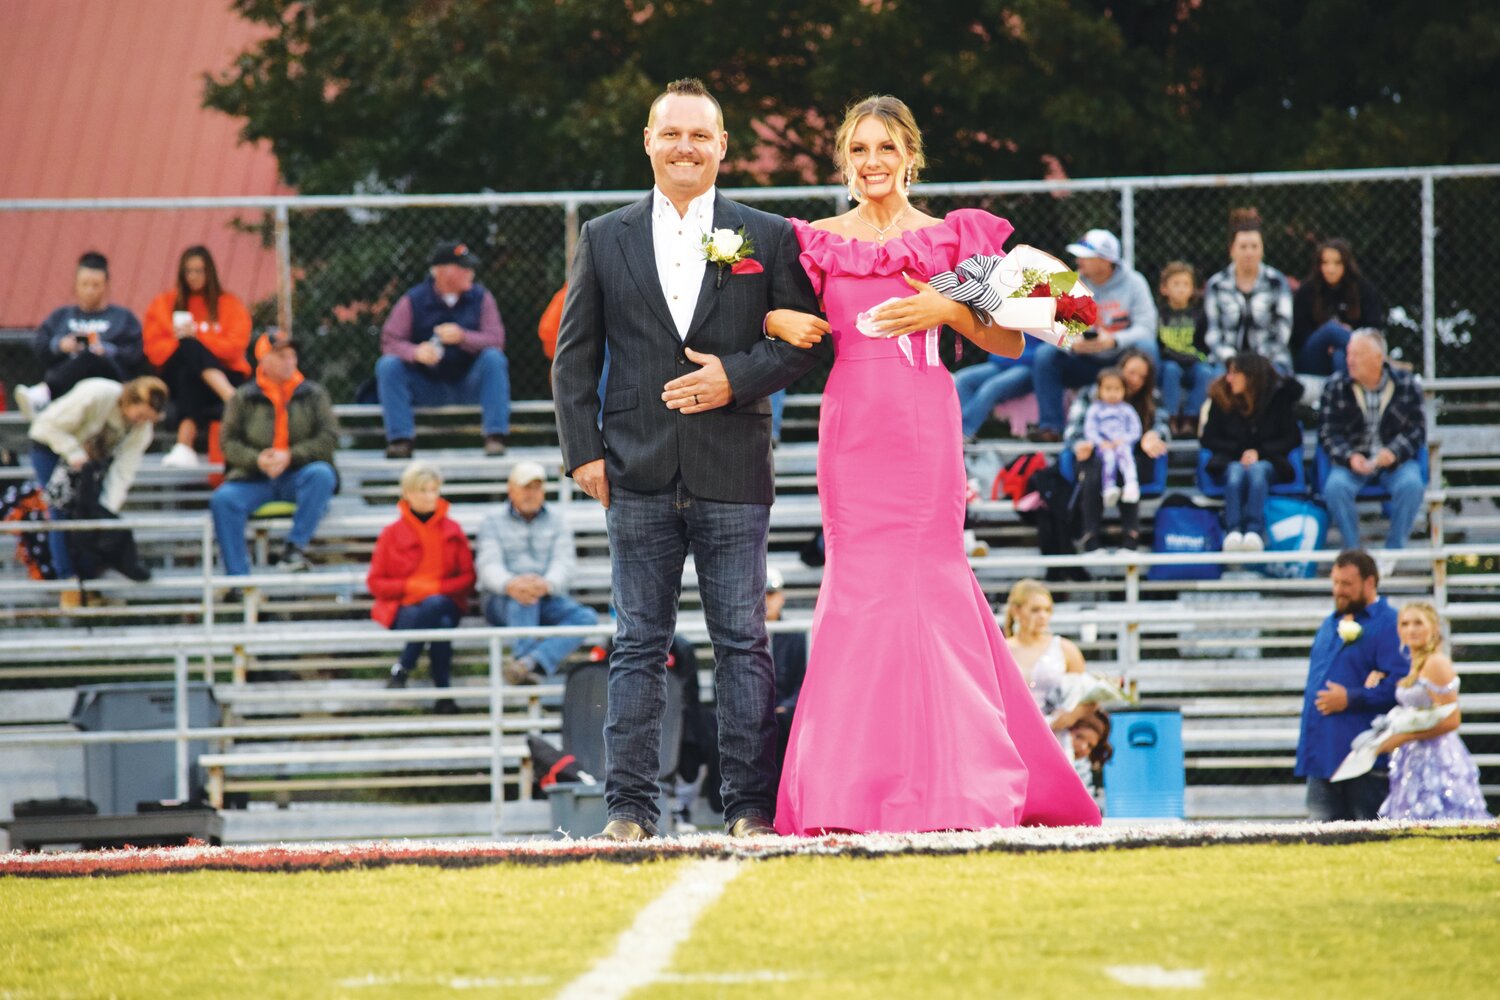 Freshmen Maid, Mylie McConnell, was escorted by her father, Drew McConnell.